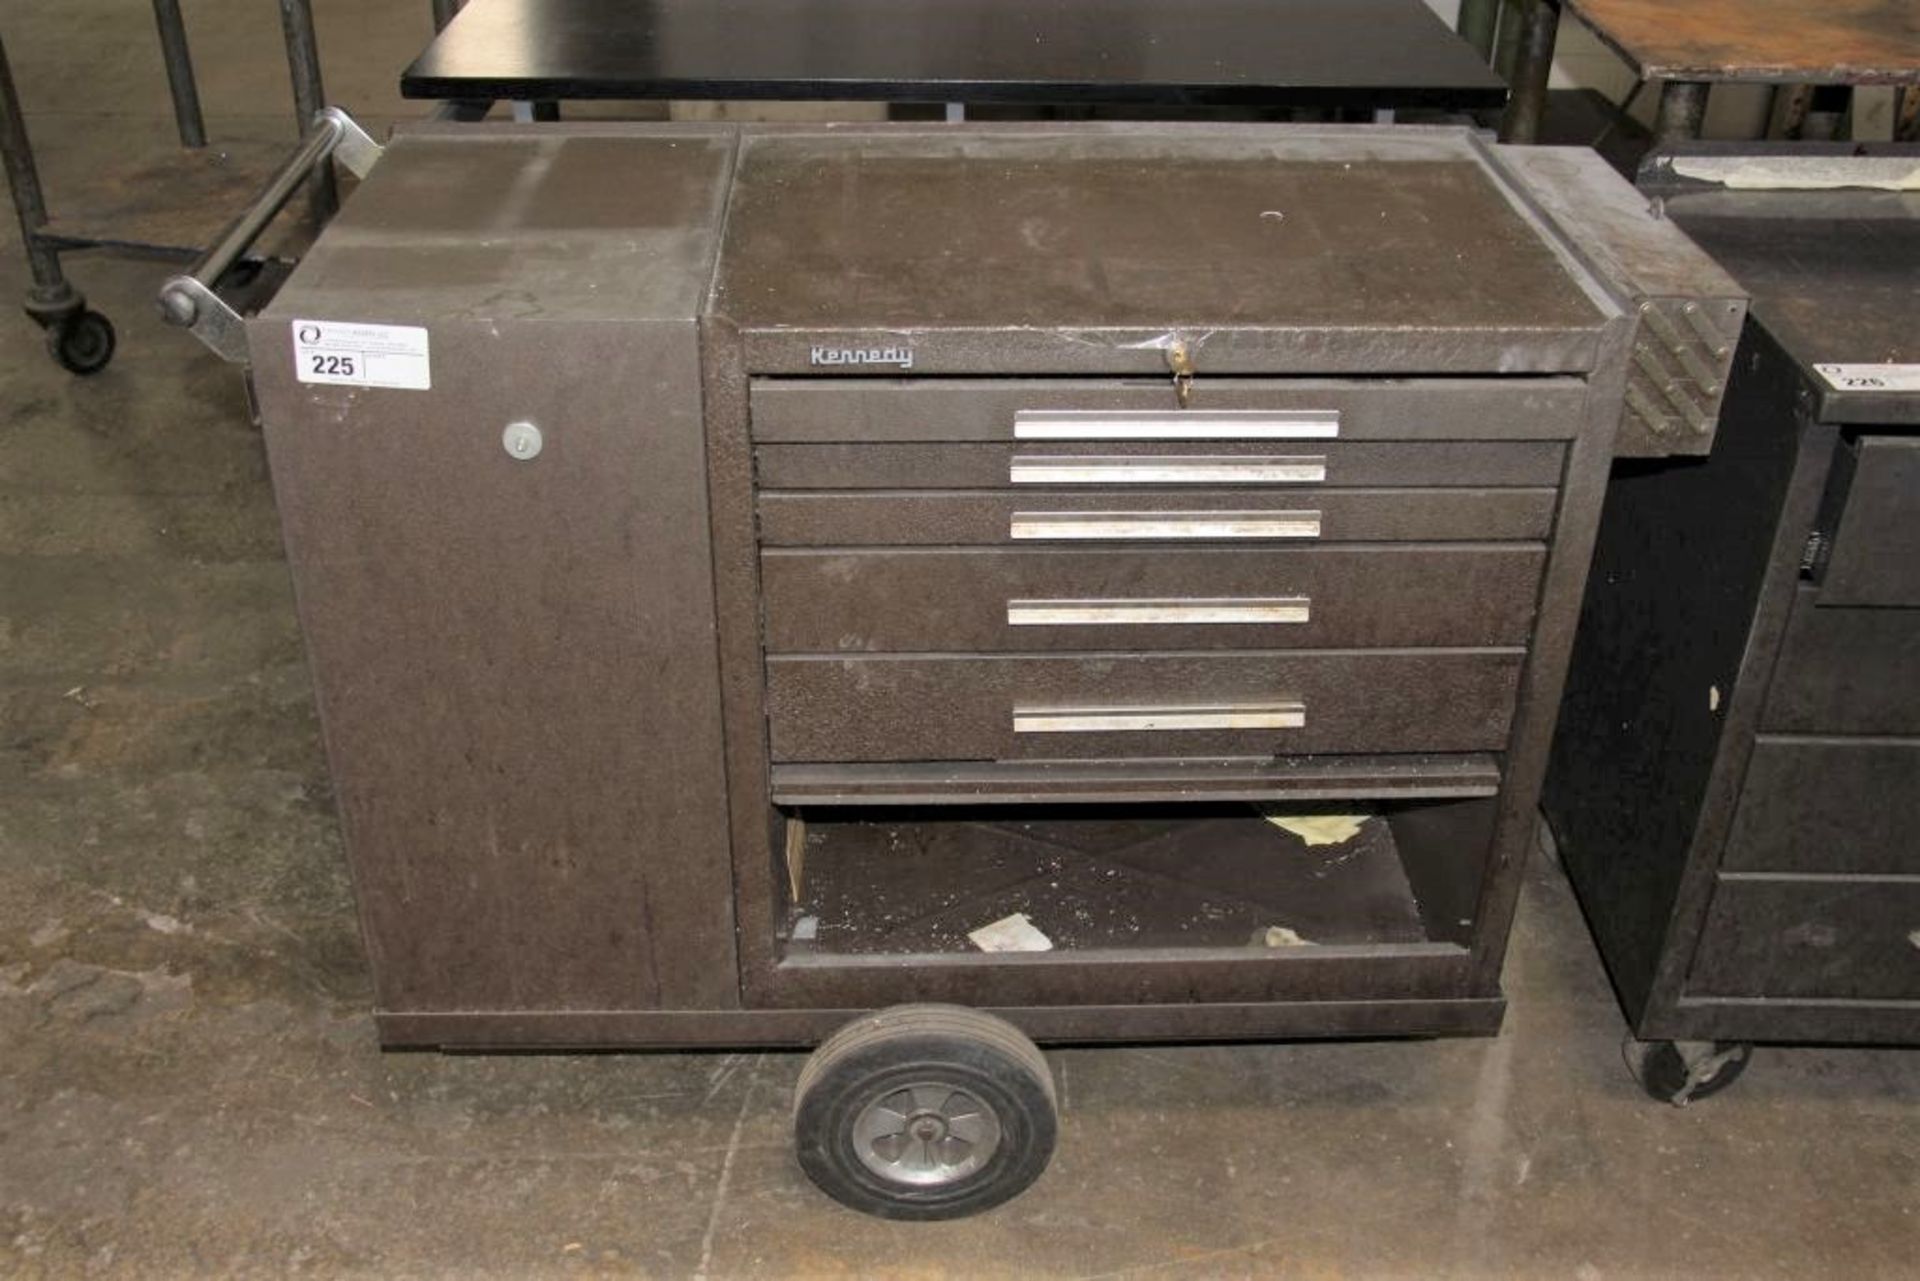 Kennedy mobile tool chest, model - 295-336485